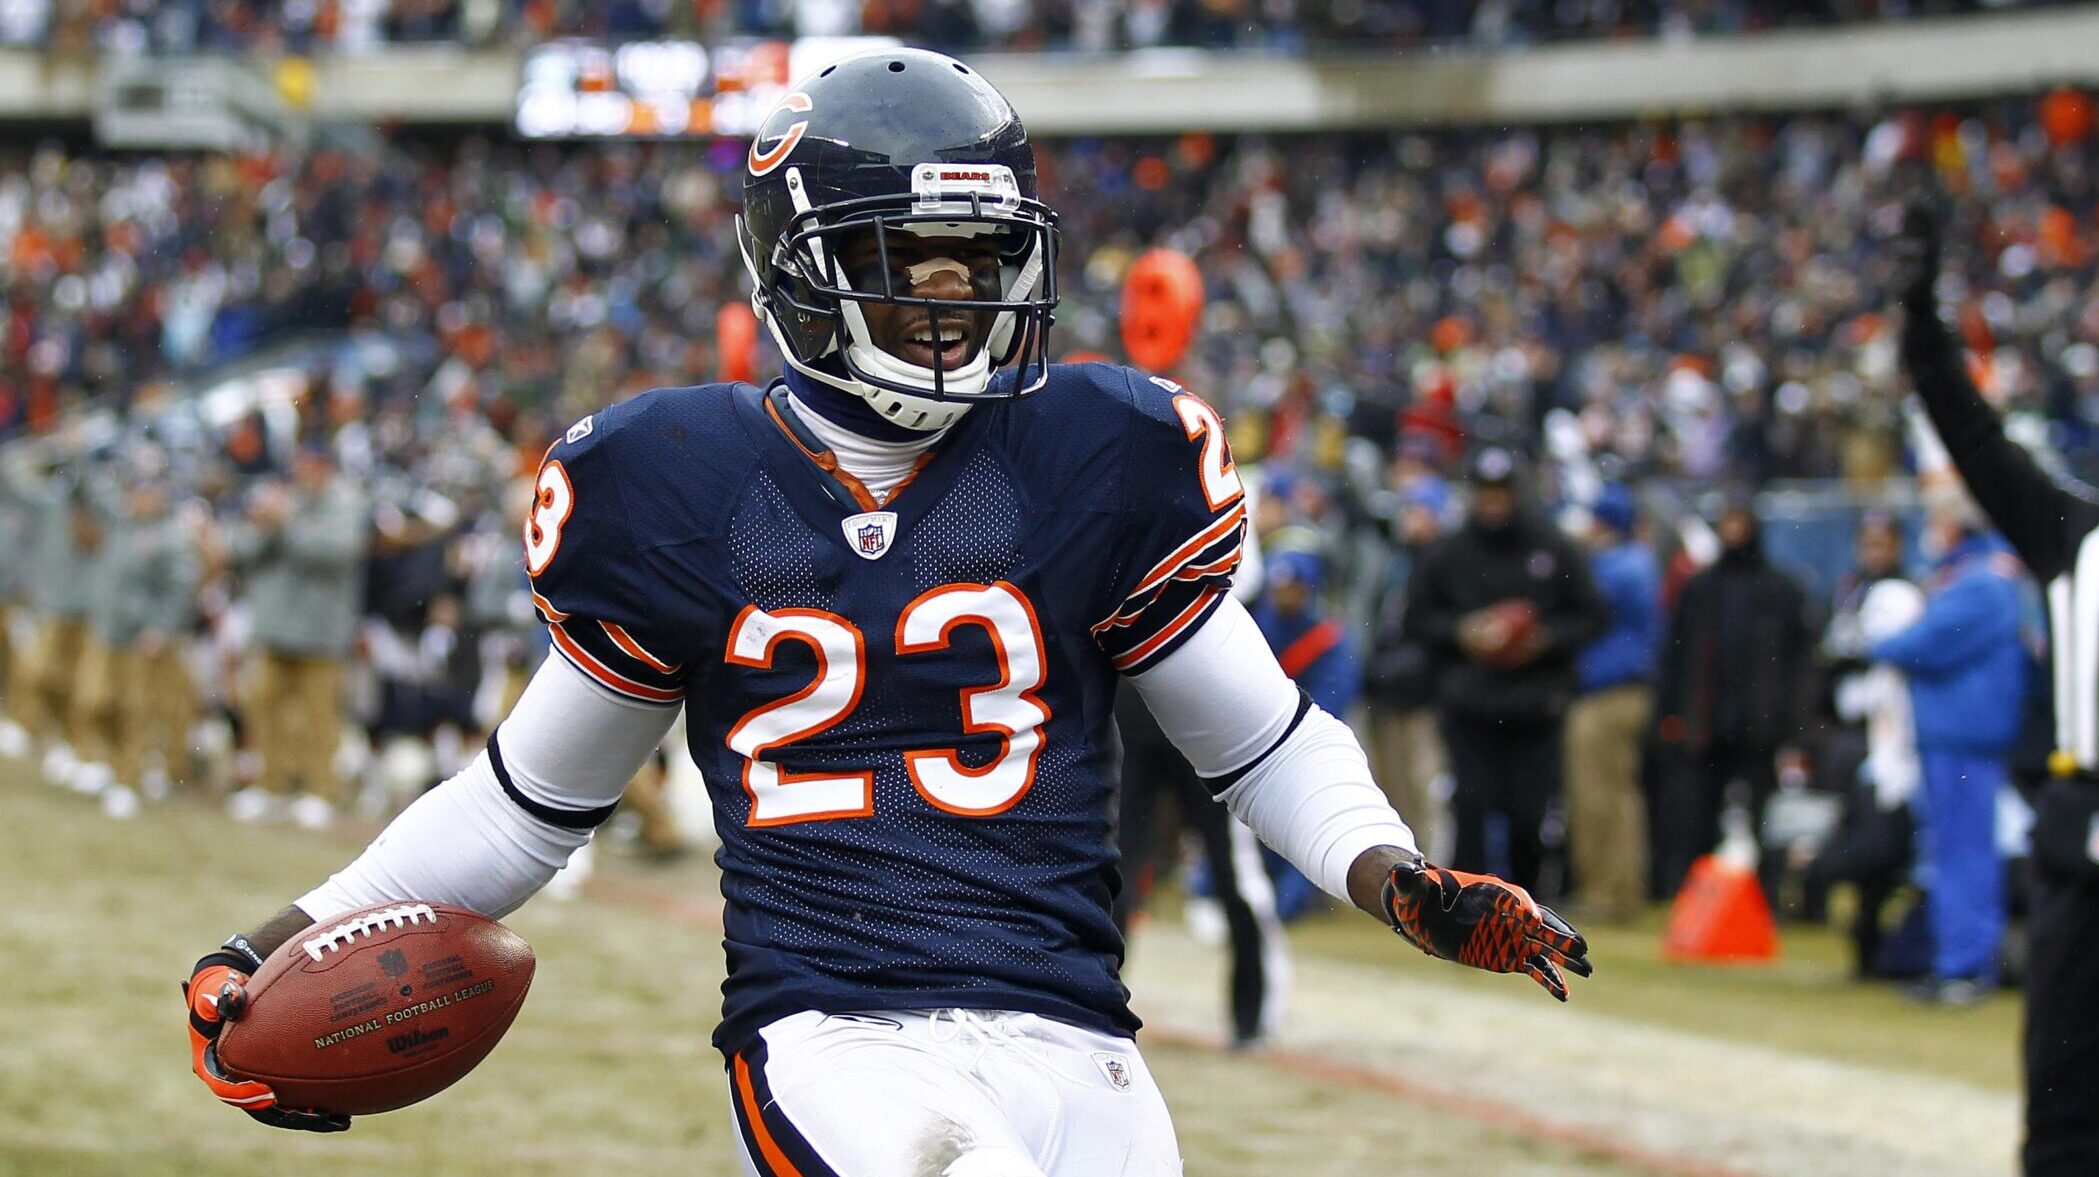 Bears Devin Hester celebrates after a touchdown